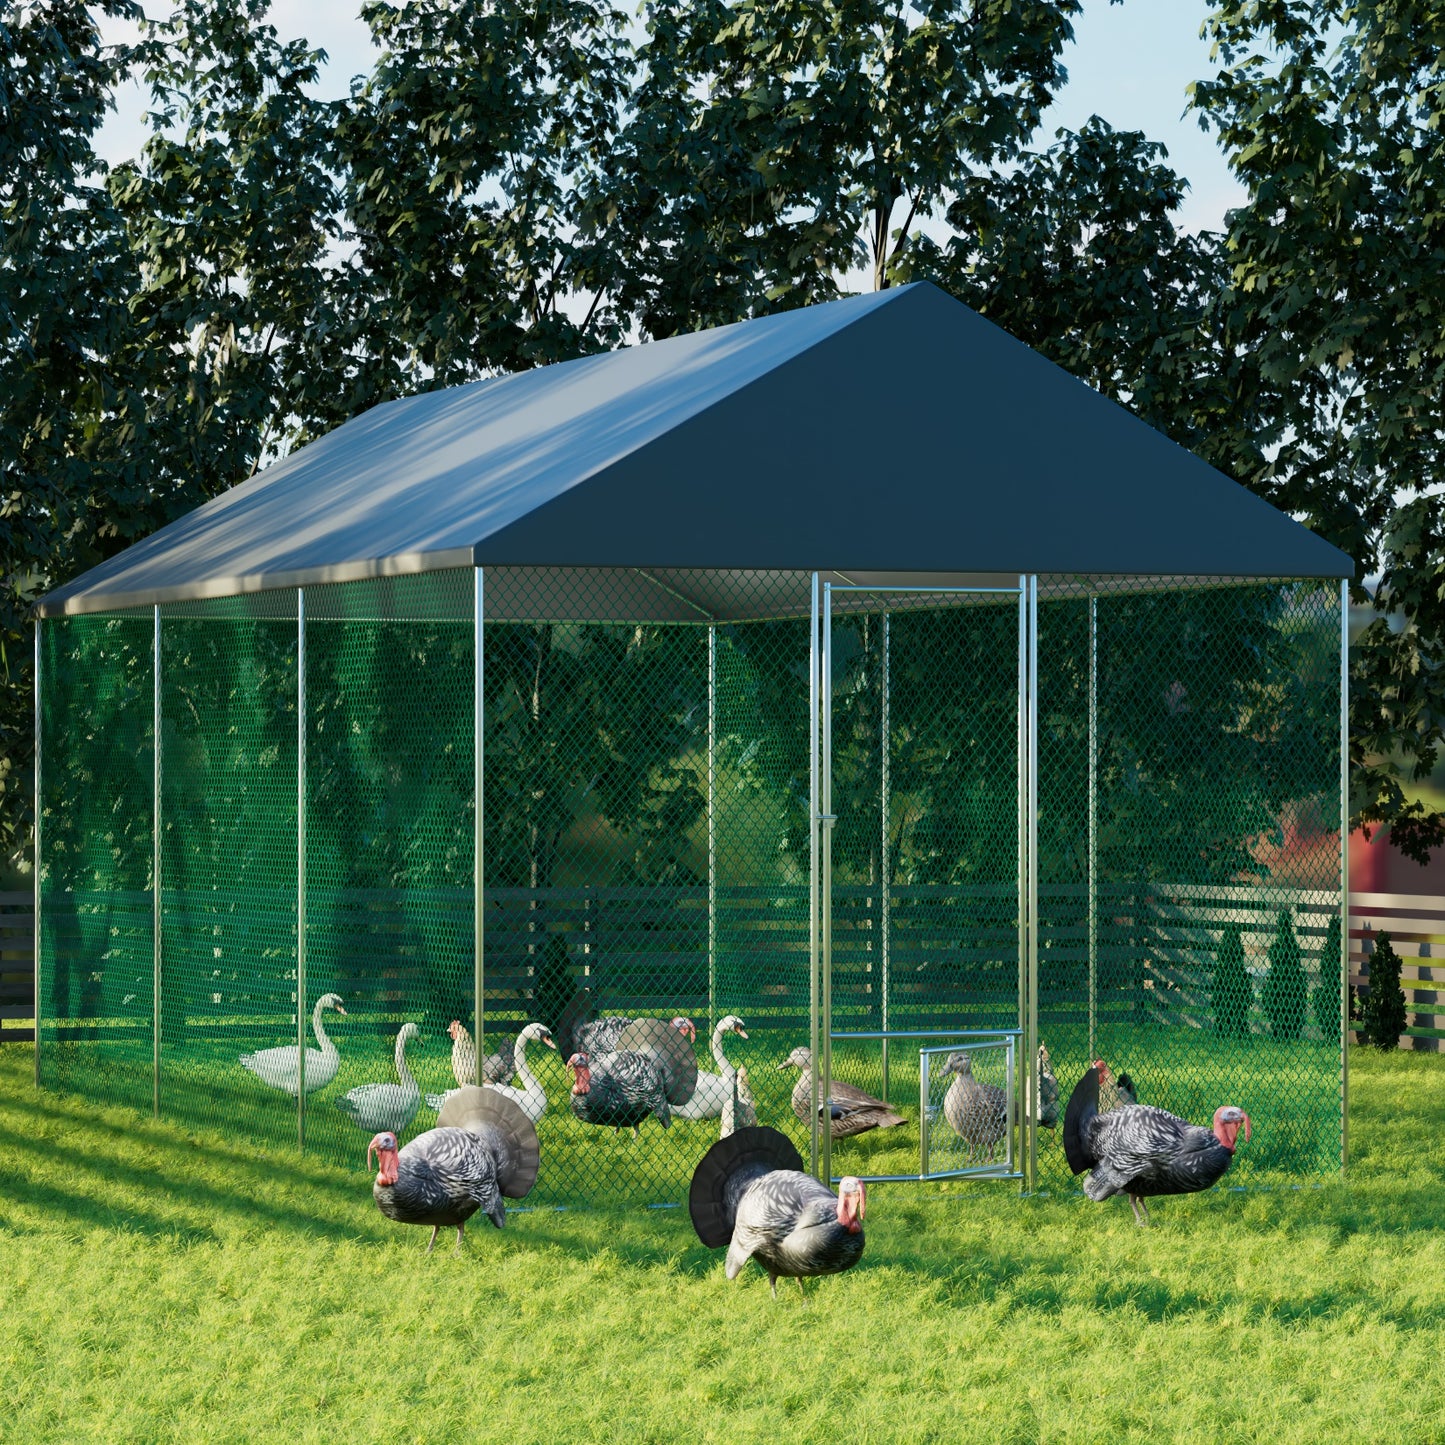 Large Chicken Coop Cage: Jumbo Large Galvanized Metal Chicken Coop Poultry Run Cage with Full Cover, High Walk-in Enclosure, Use for Outdoor Backyard